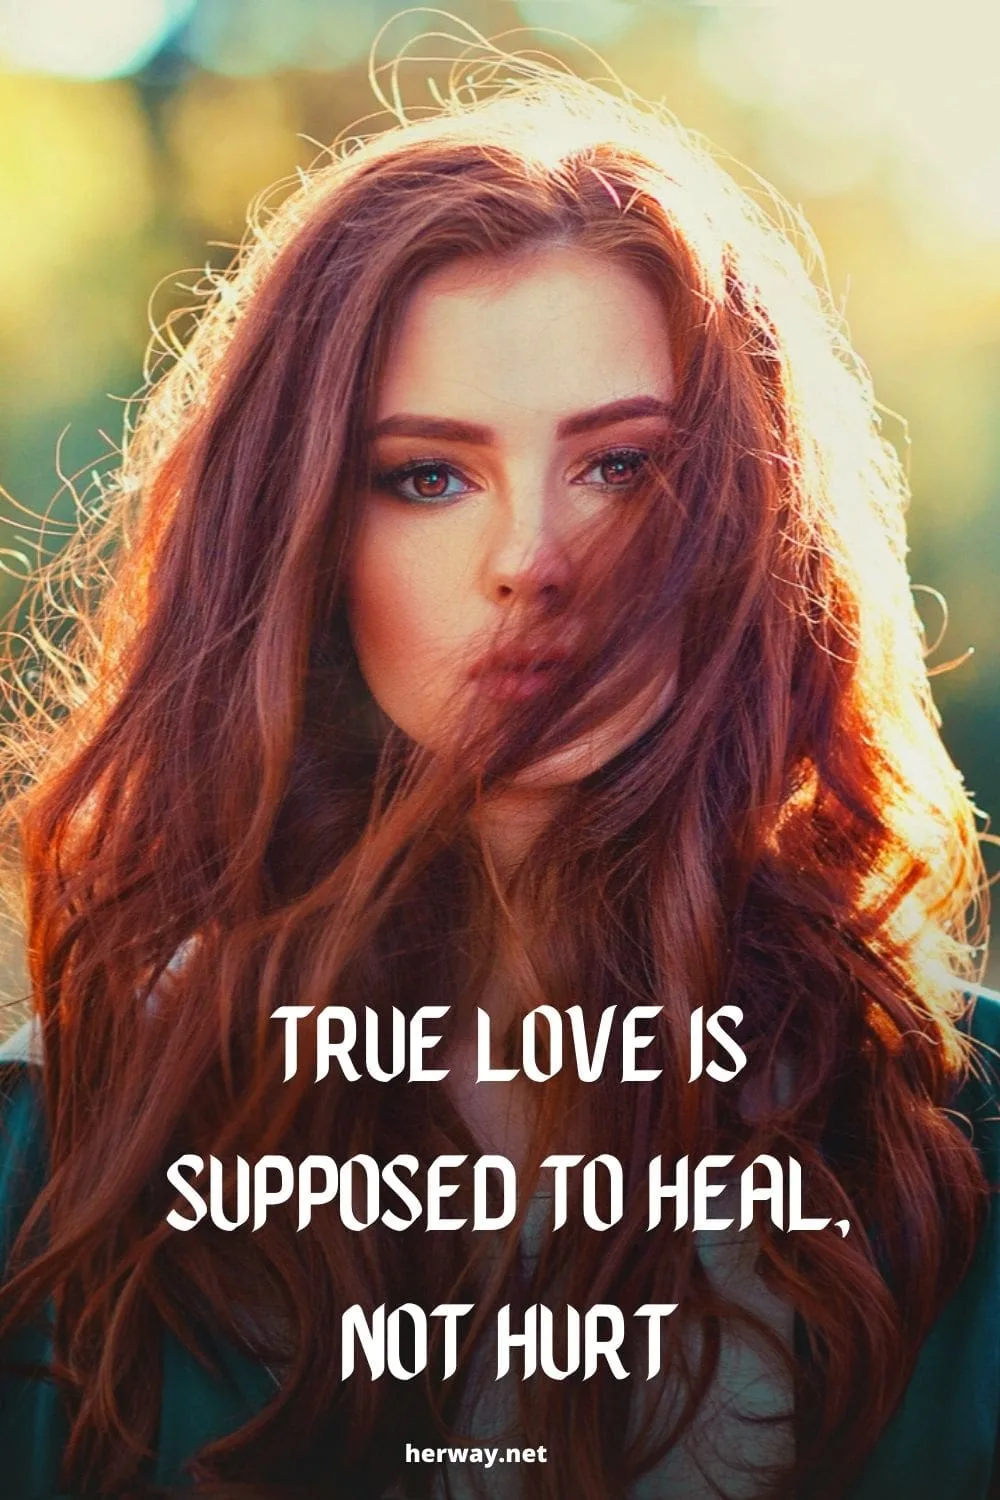 True Love Is Supposed To Heal, Not Hurt